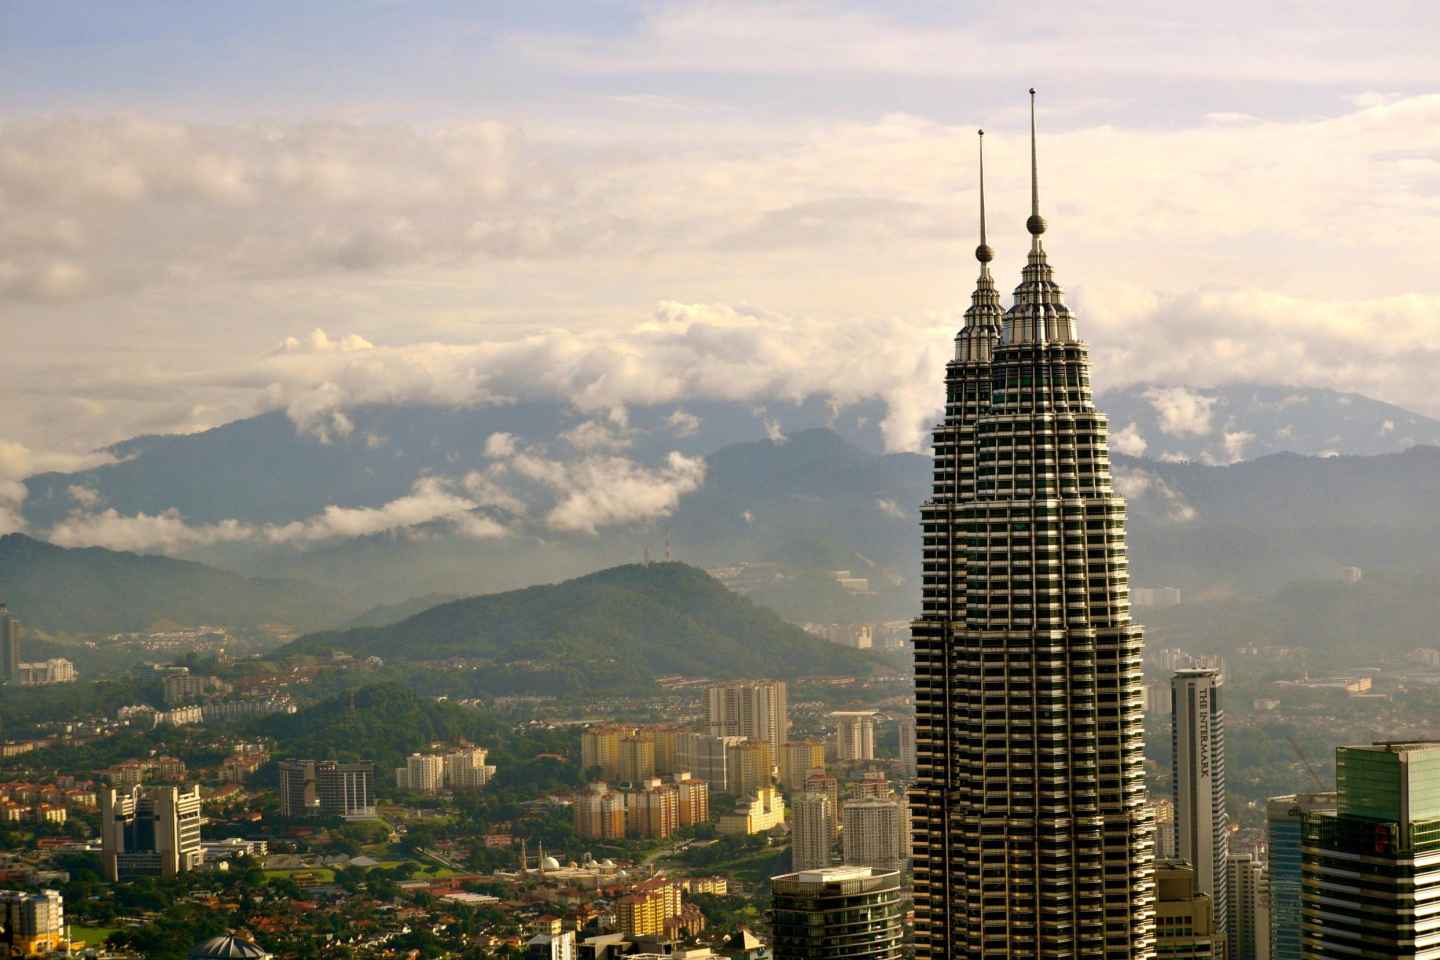 Top 15 Things To Do In Kuala Lumpur At Night - Updated 2022